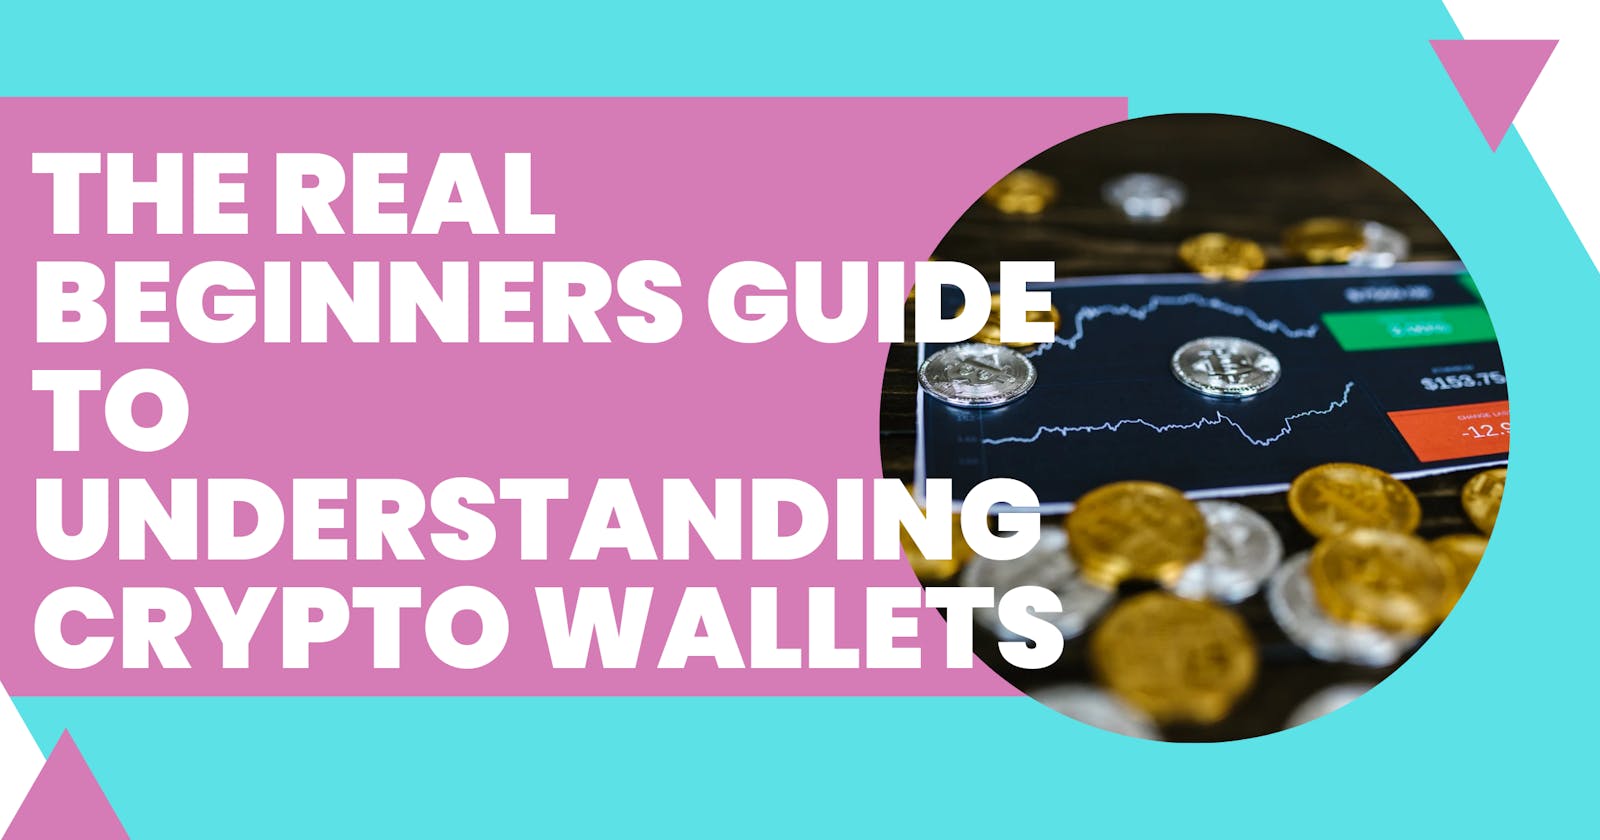 The Real Beginners Guide To Understanding Crypto Wallets